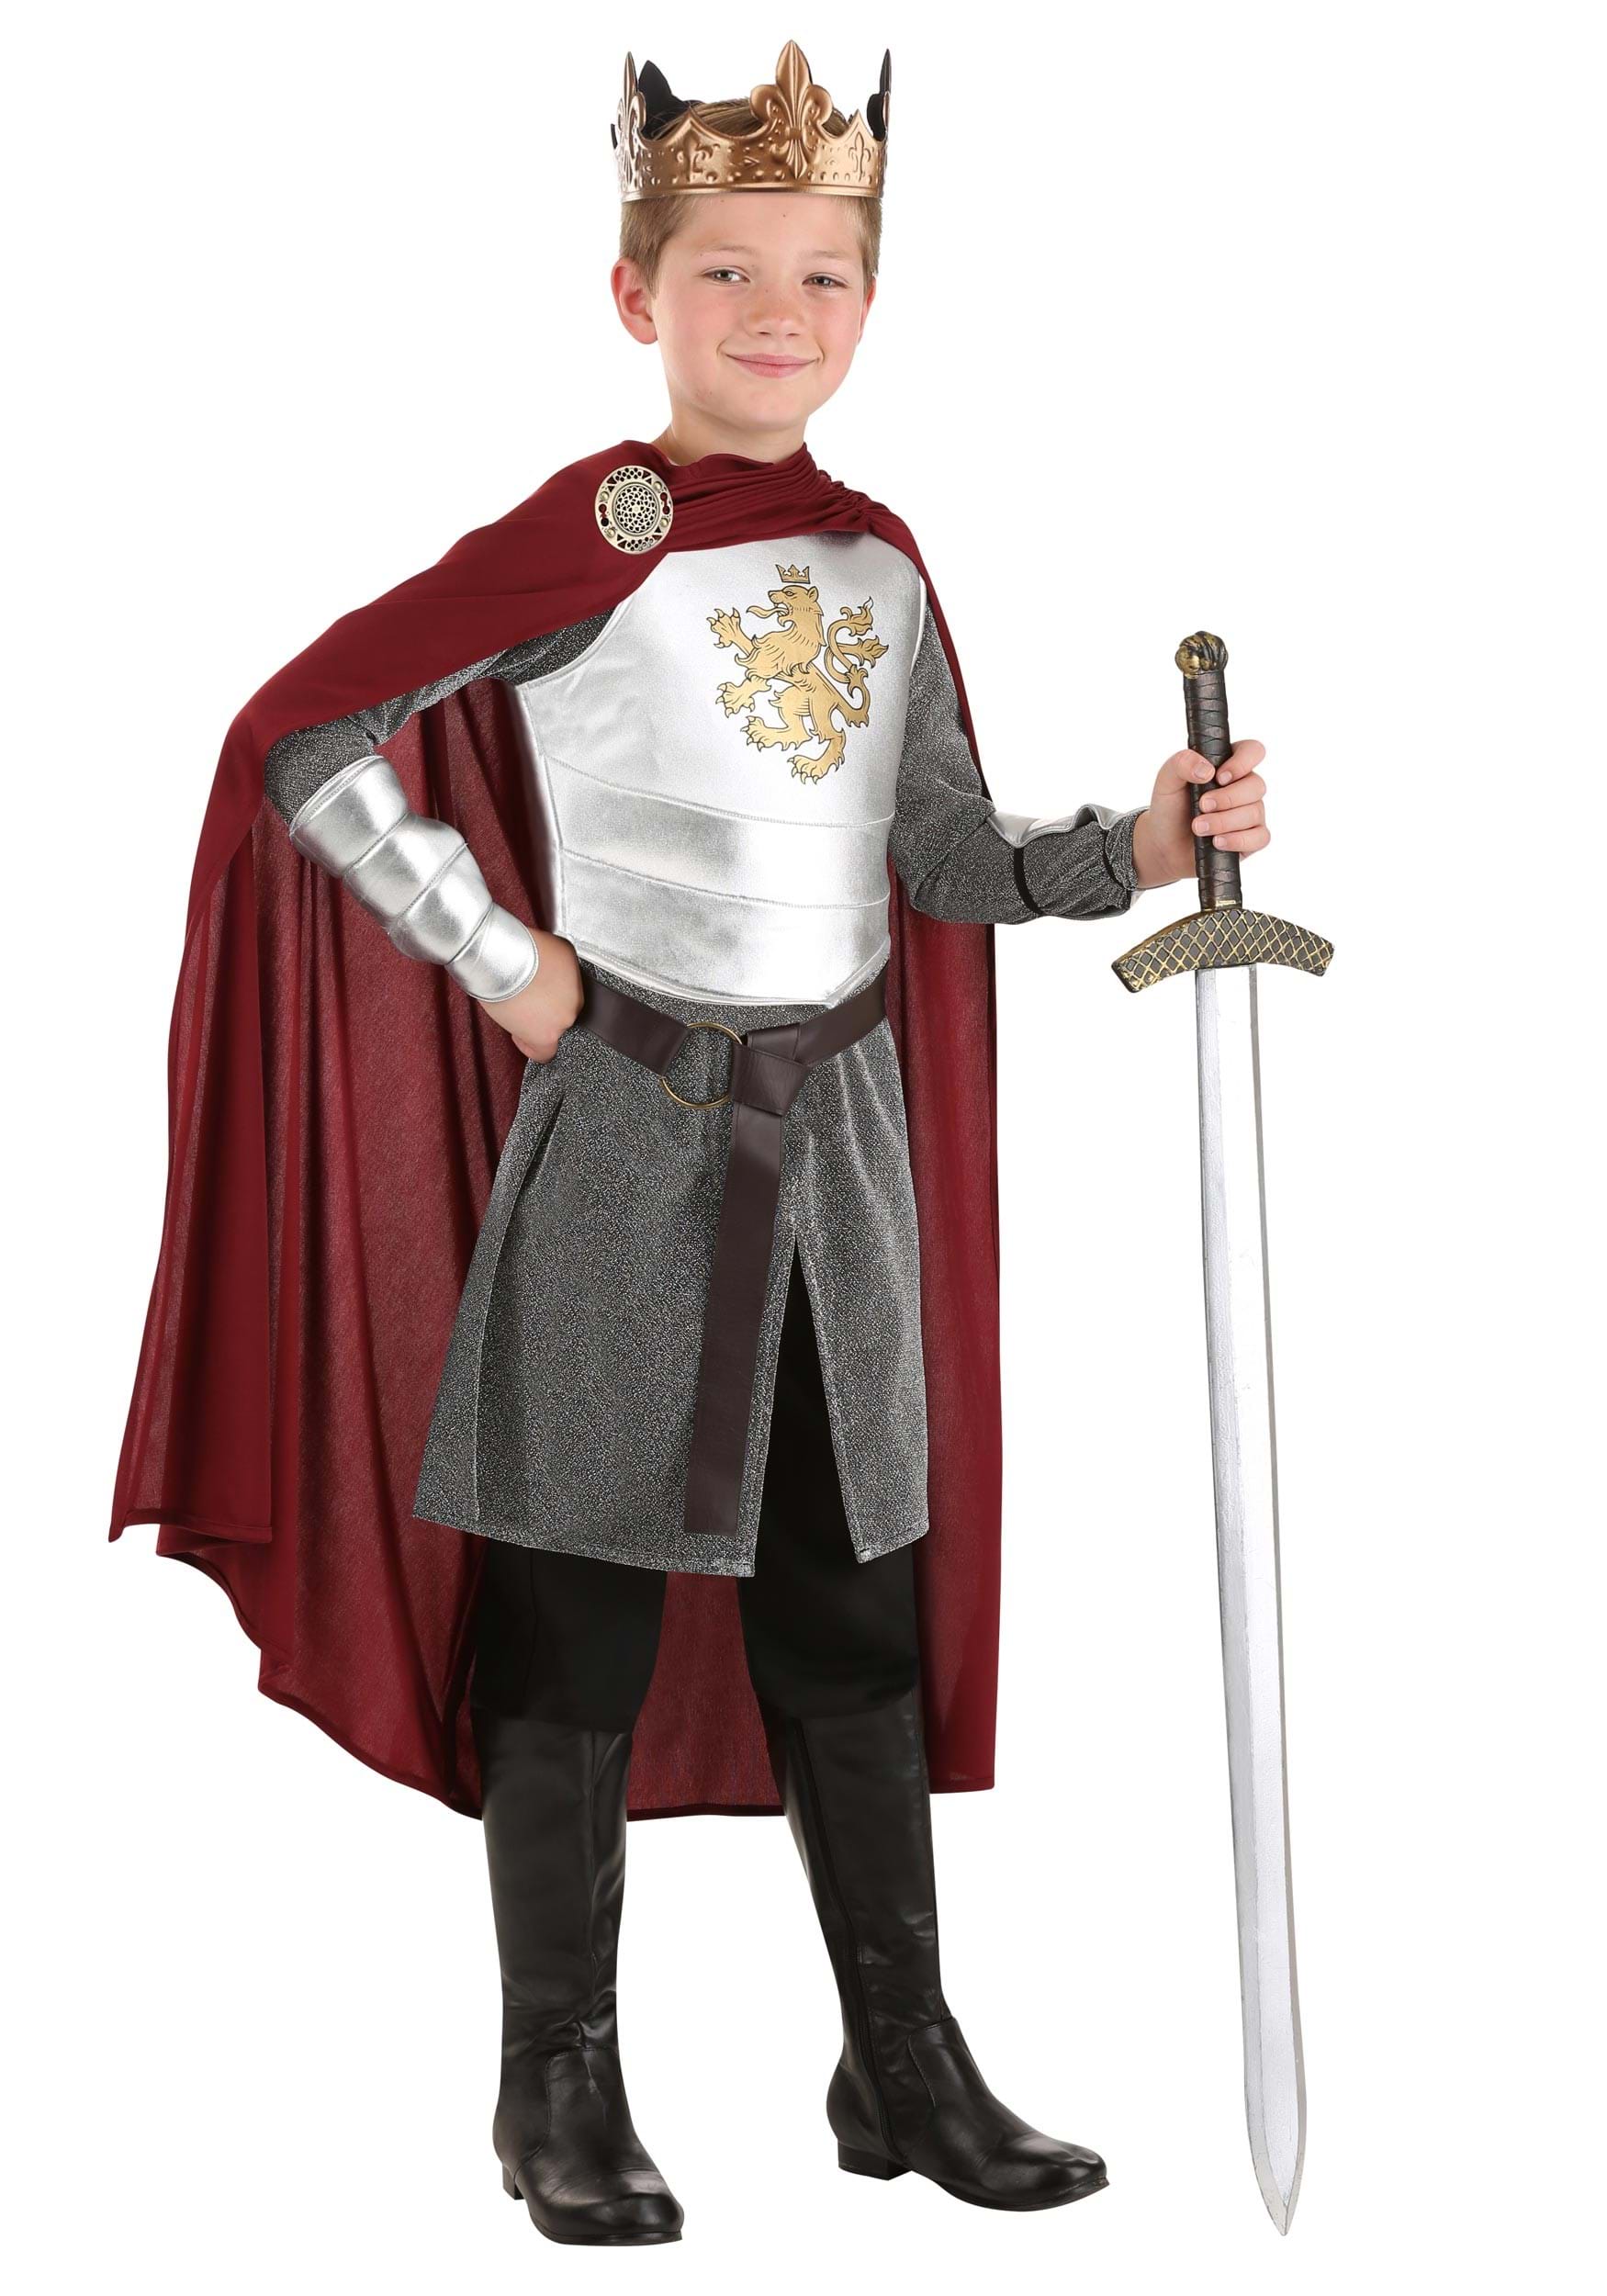 Lionheart Knight Costume for Kids